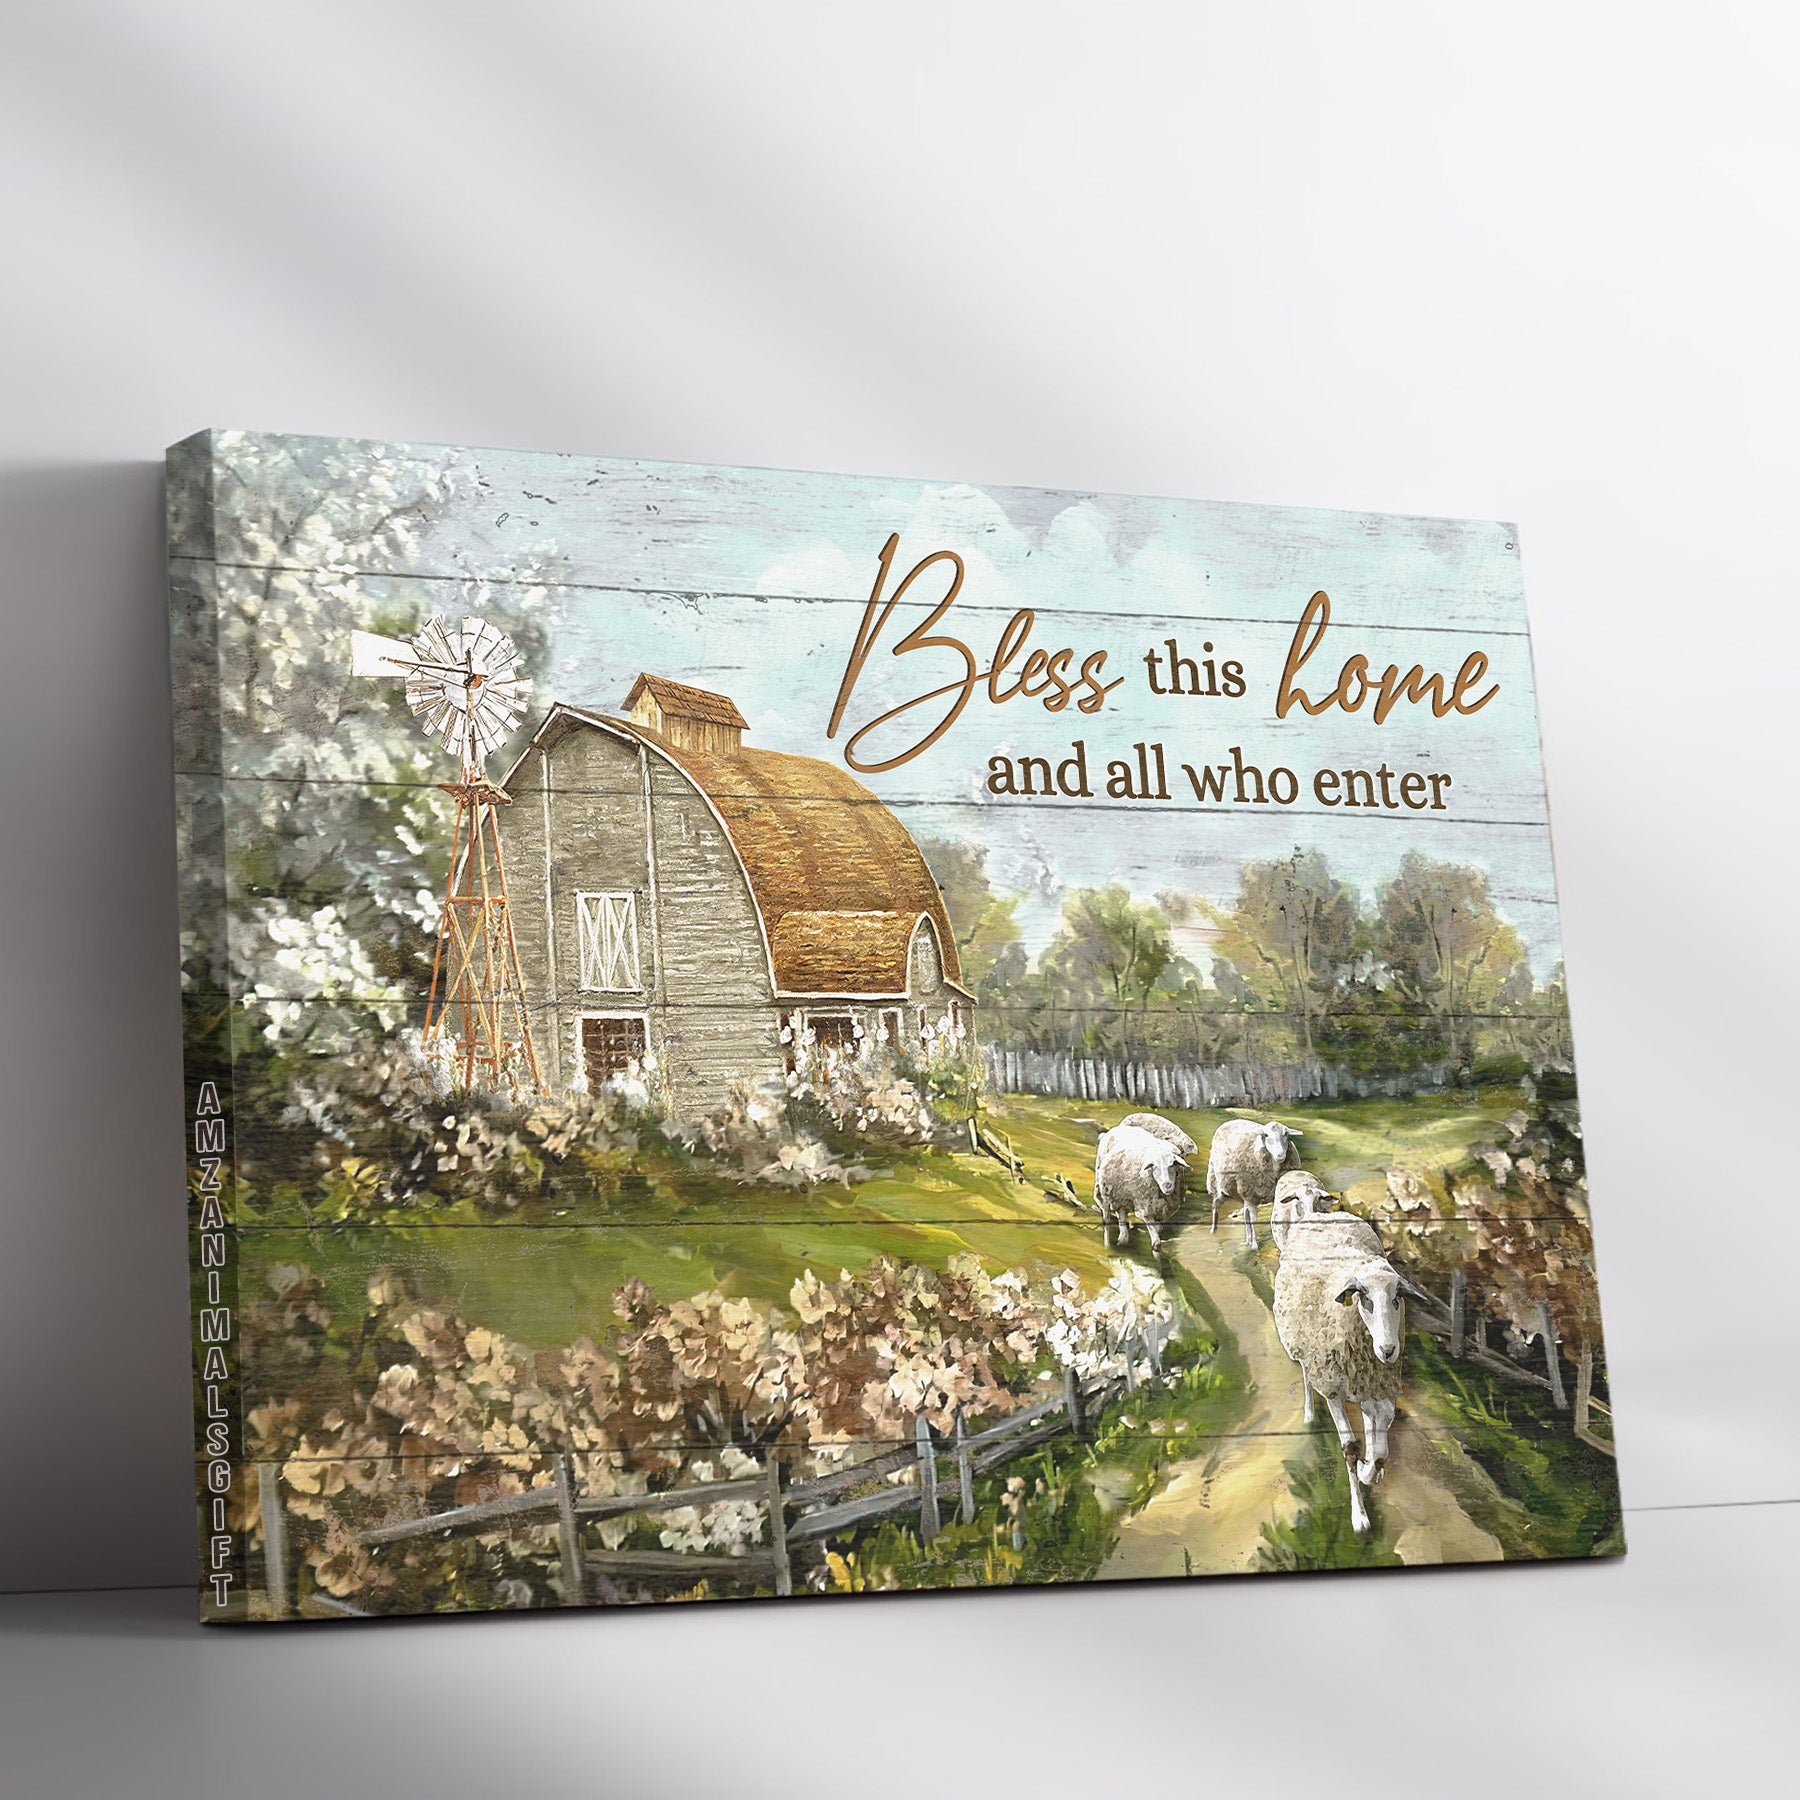 Farm Premium Wrapped Landscape Canvas - Beautiful Farm, Sheep Drawing, Vintage House, Bless This House - Gift For Farm Lovers, Farmers